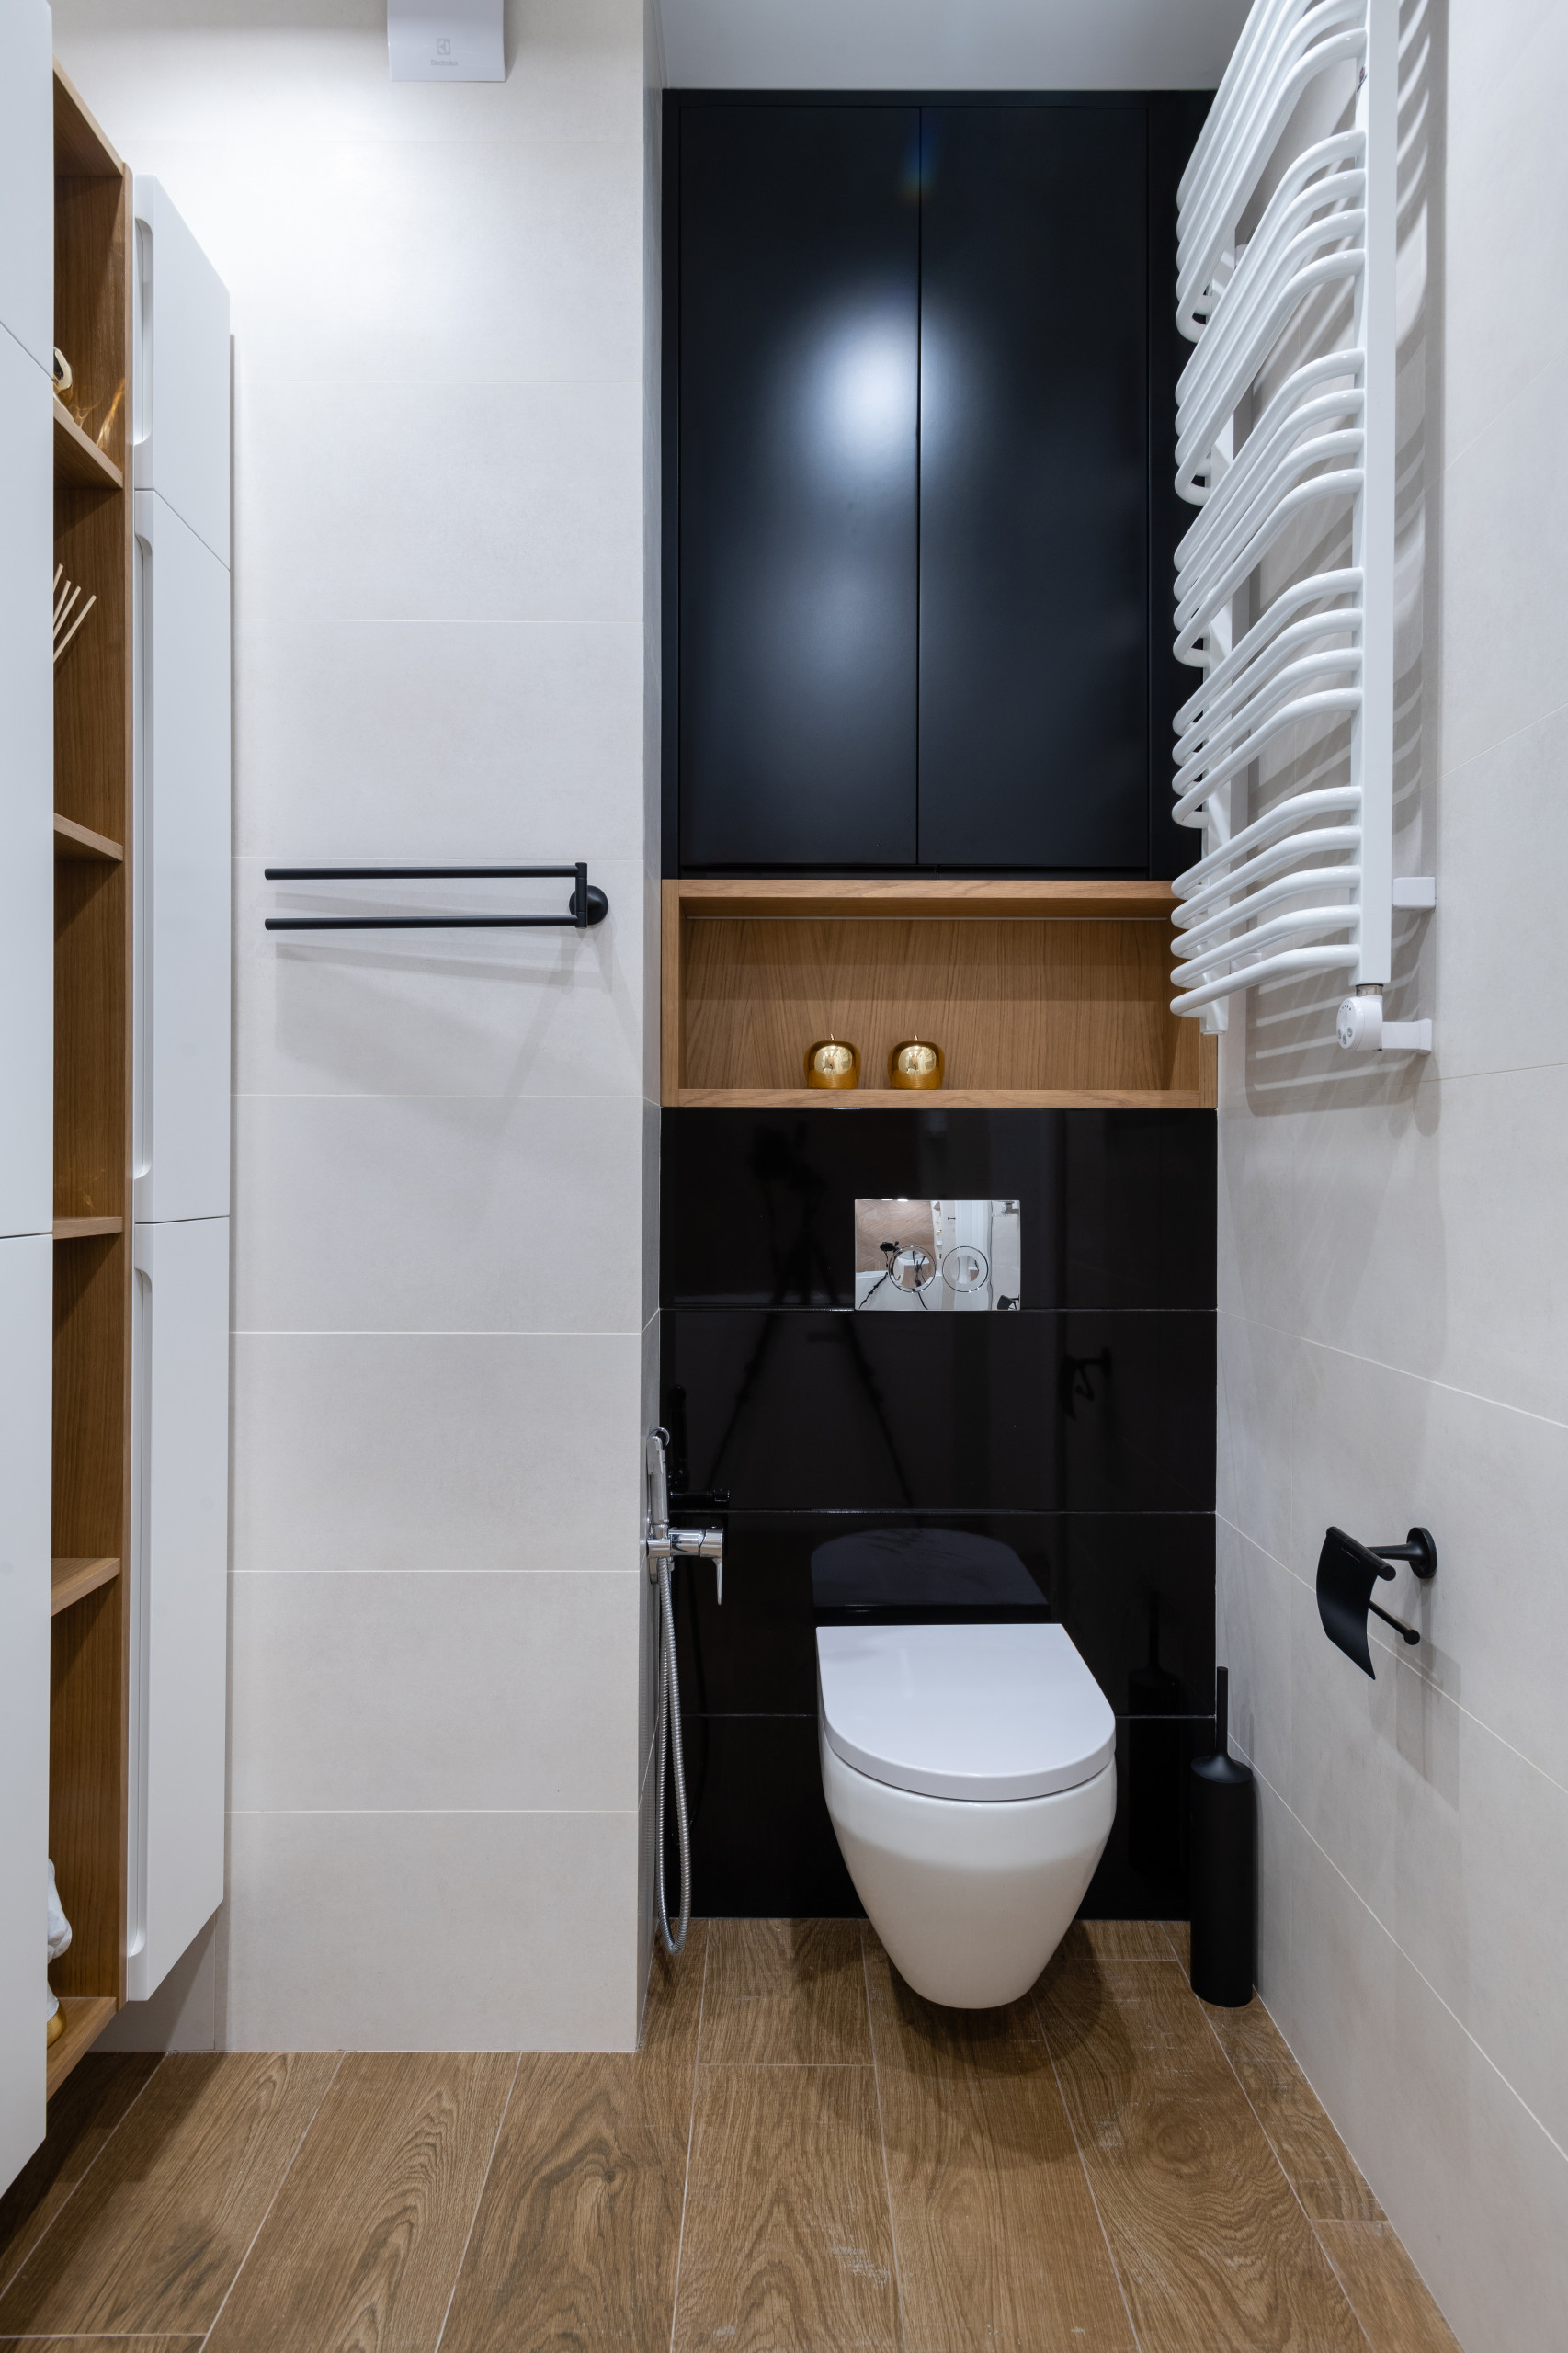 75 Toilet Room Ideas You'll Love - July, 2023 | Houzz